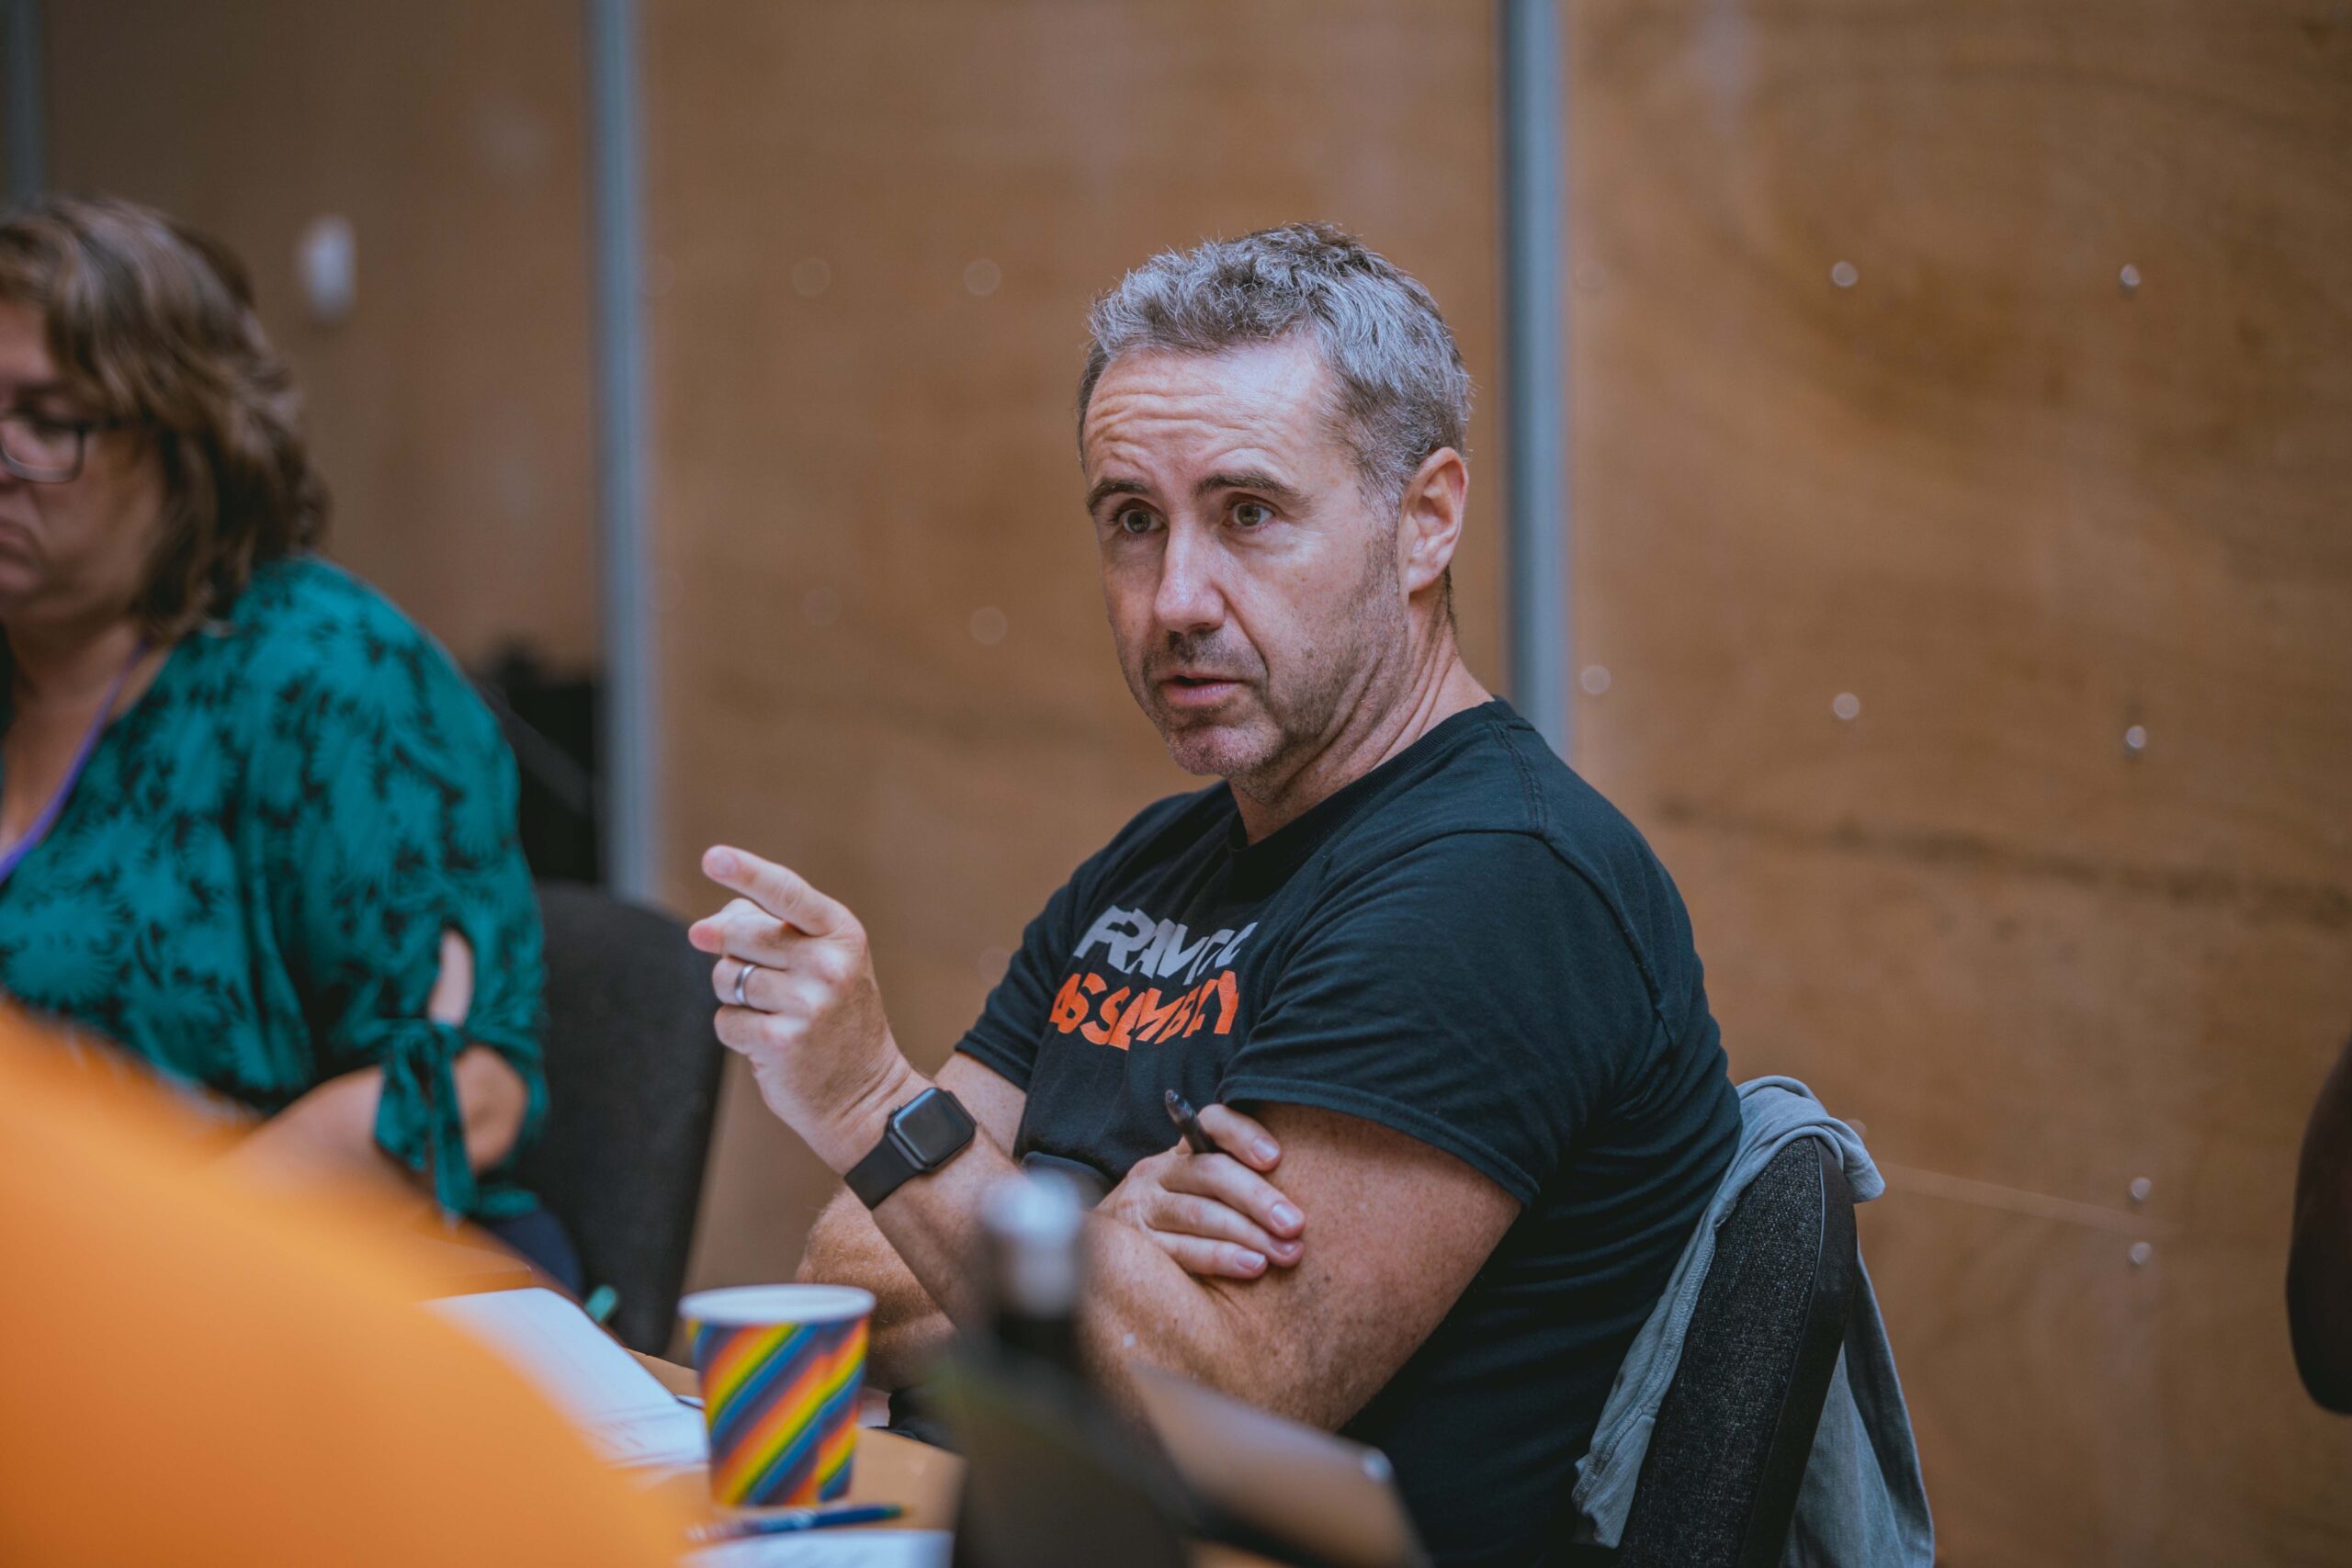 In a wood-cladded rehearsal room, Frantic Assembly Artistic Director Scott Graham is seated, talking to someone in the distance as he points.